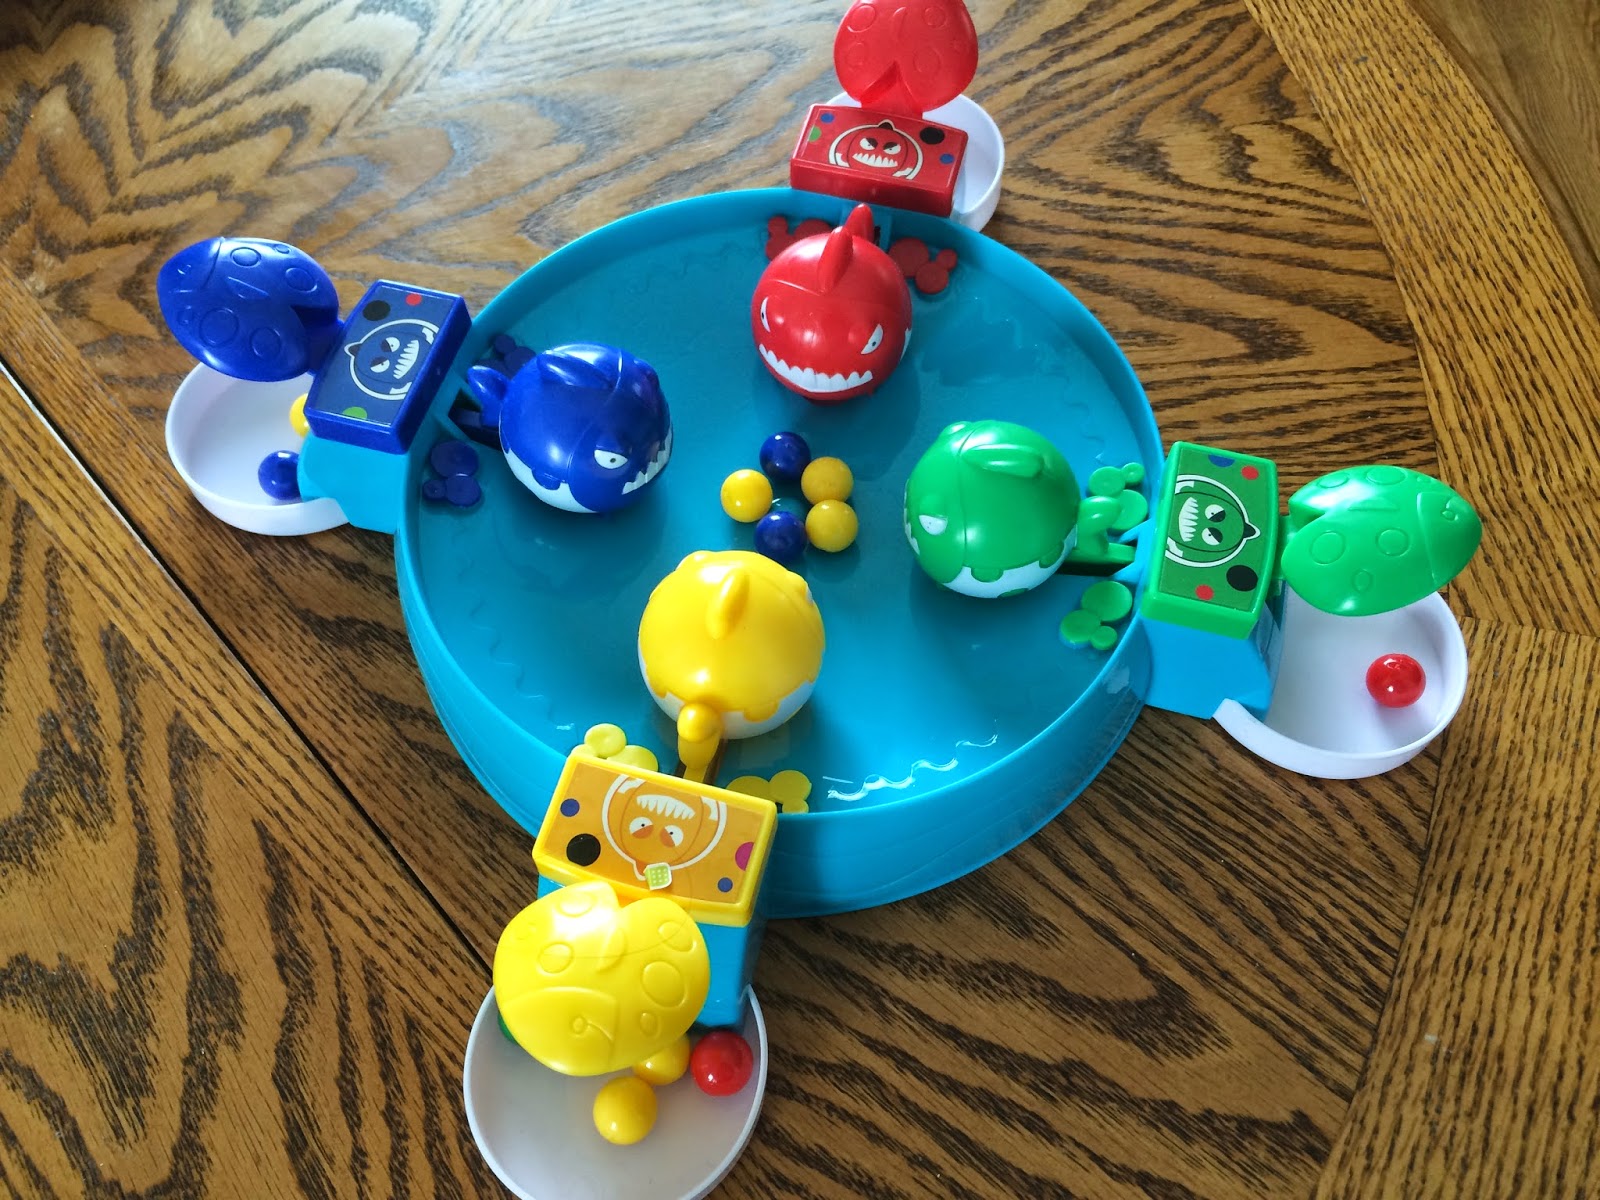 Hungry Hungry Hippos In Speech Therapy